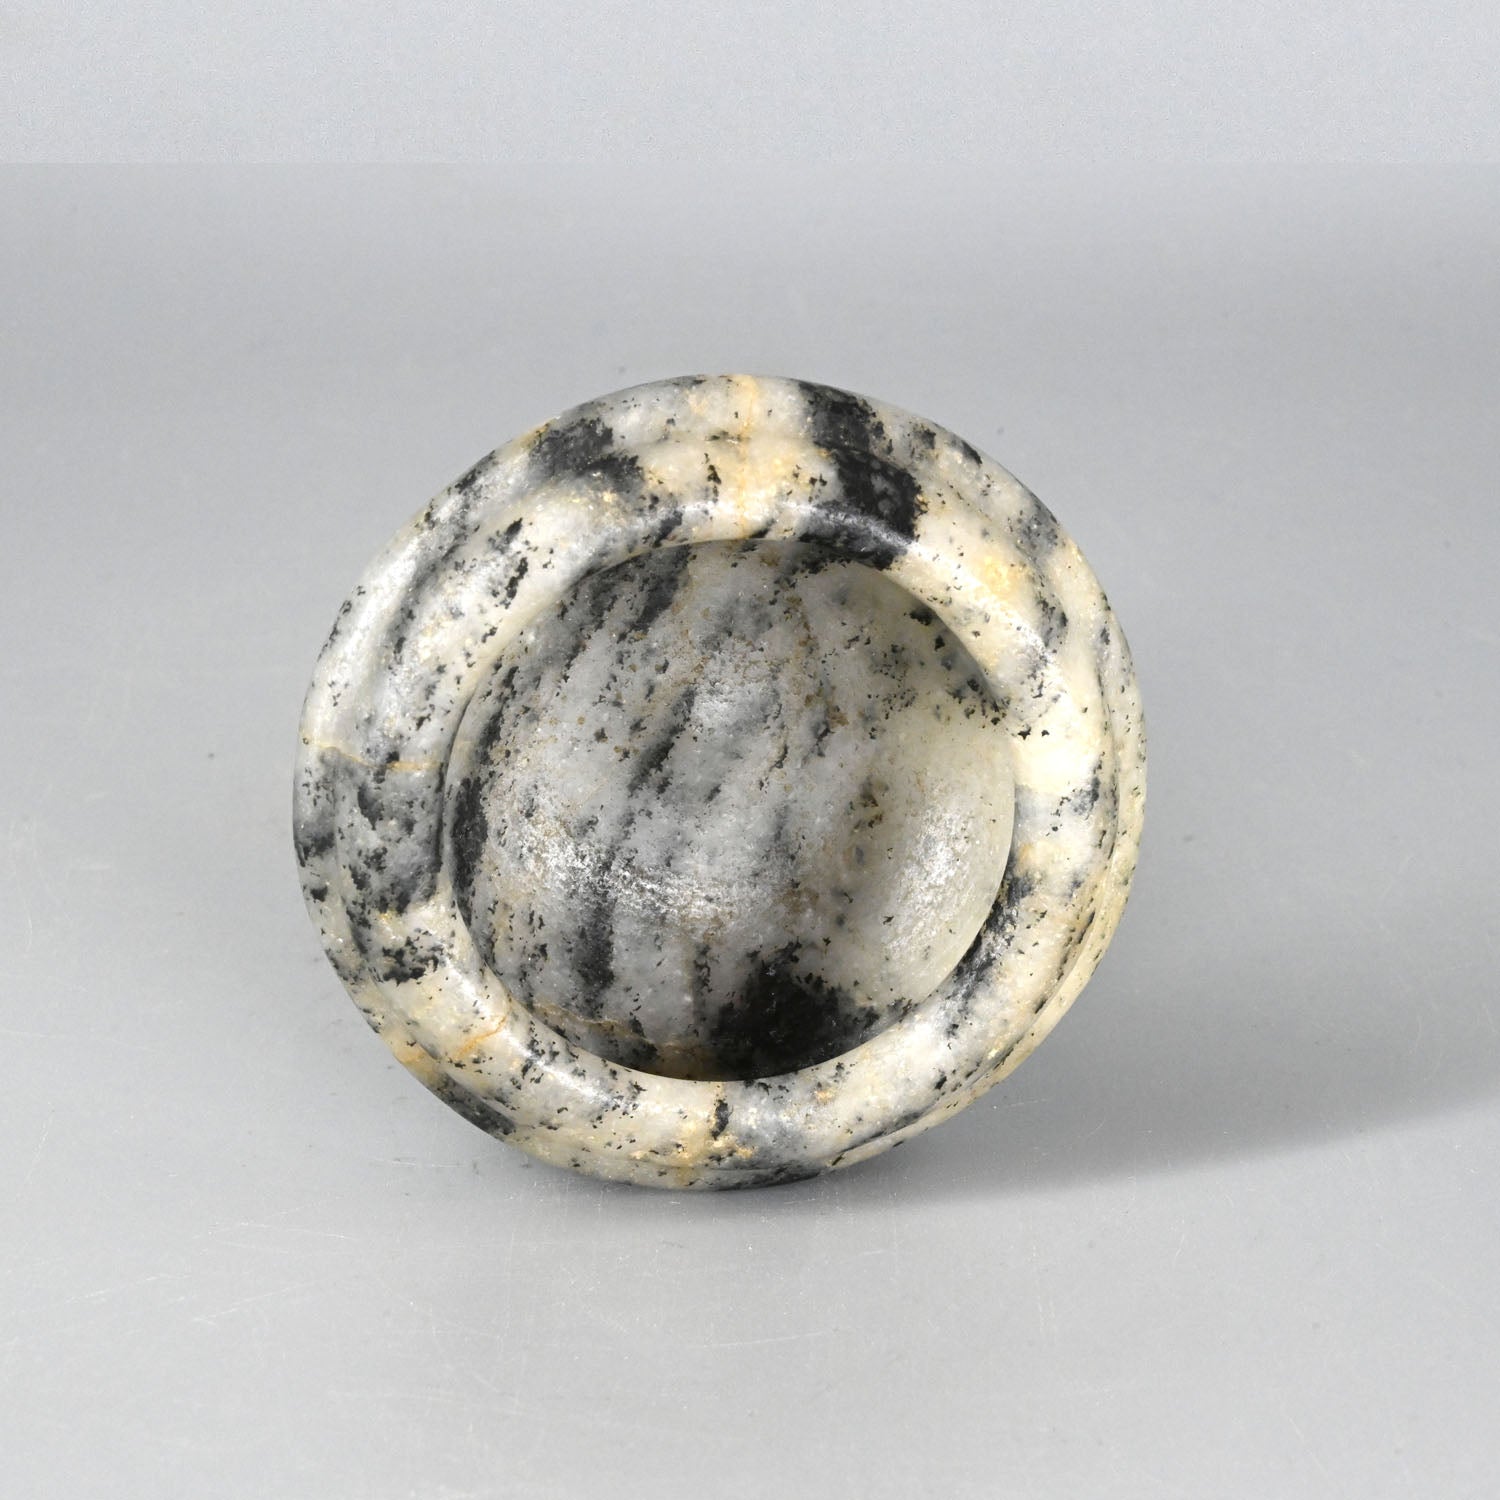 A fine Egyptian Anorthosite Gneiss Bowl, early Dynastic Period, Dynasty 2, ca. 2770 - 2649 BCE